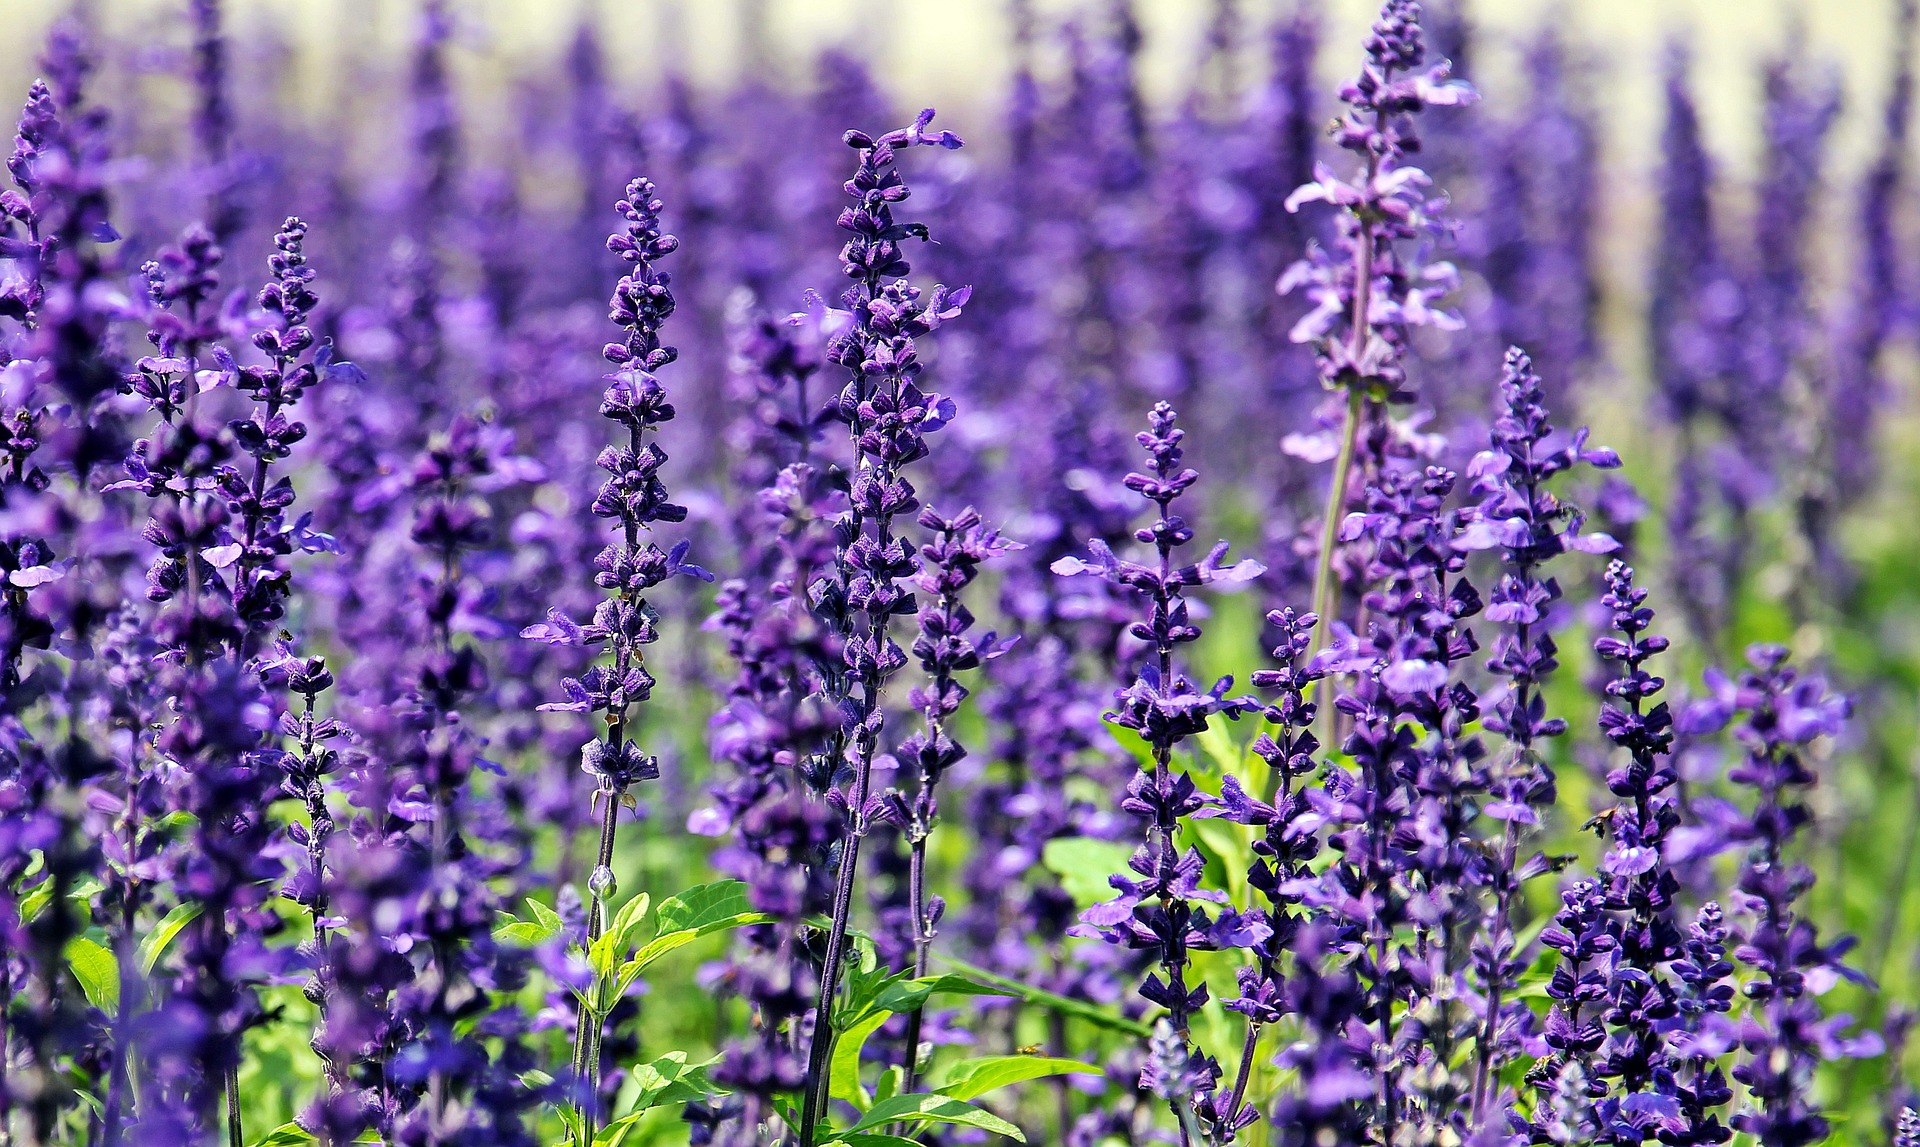 Lavender, which herbs are invasive